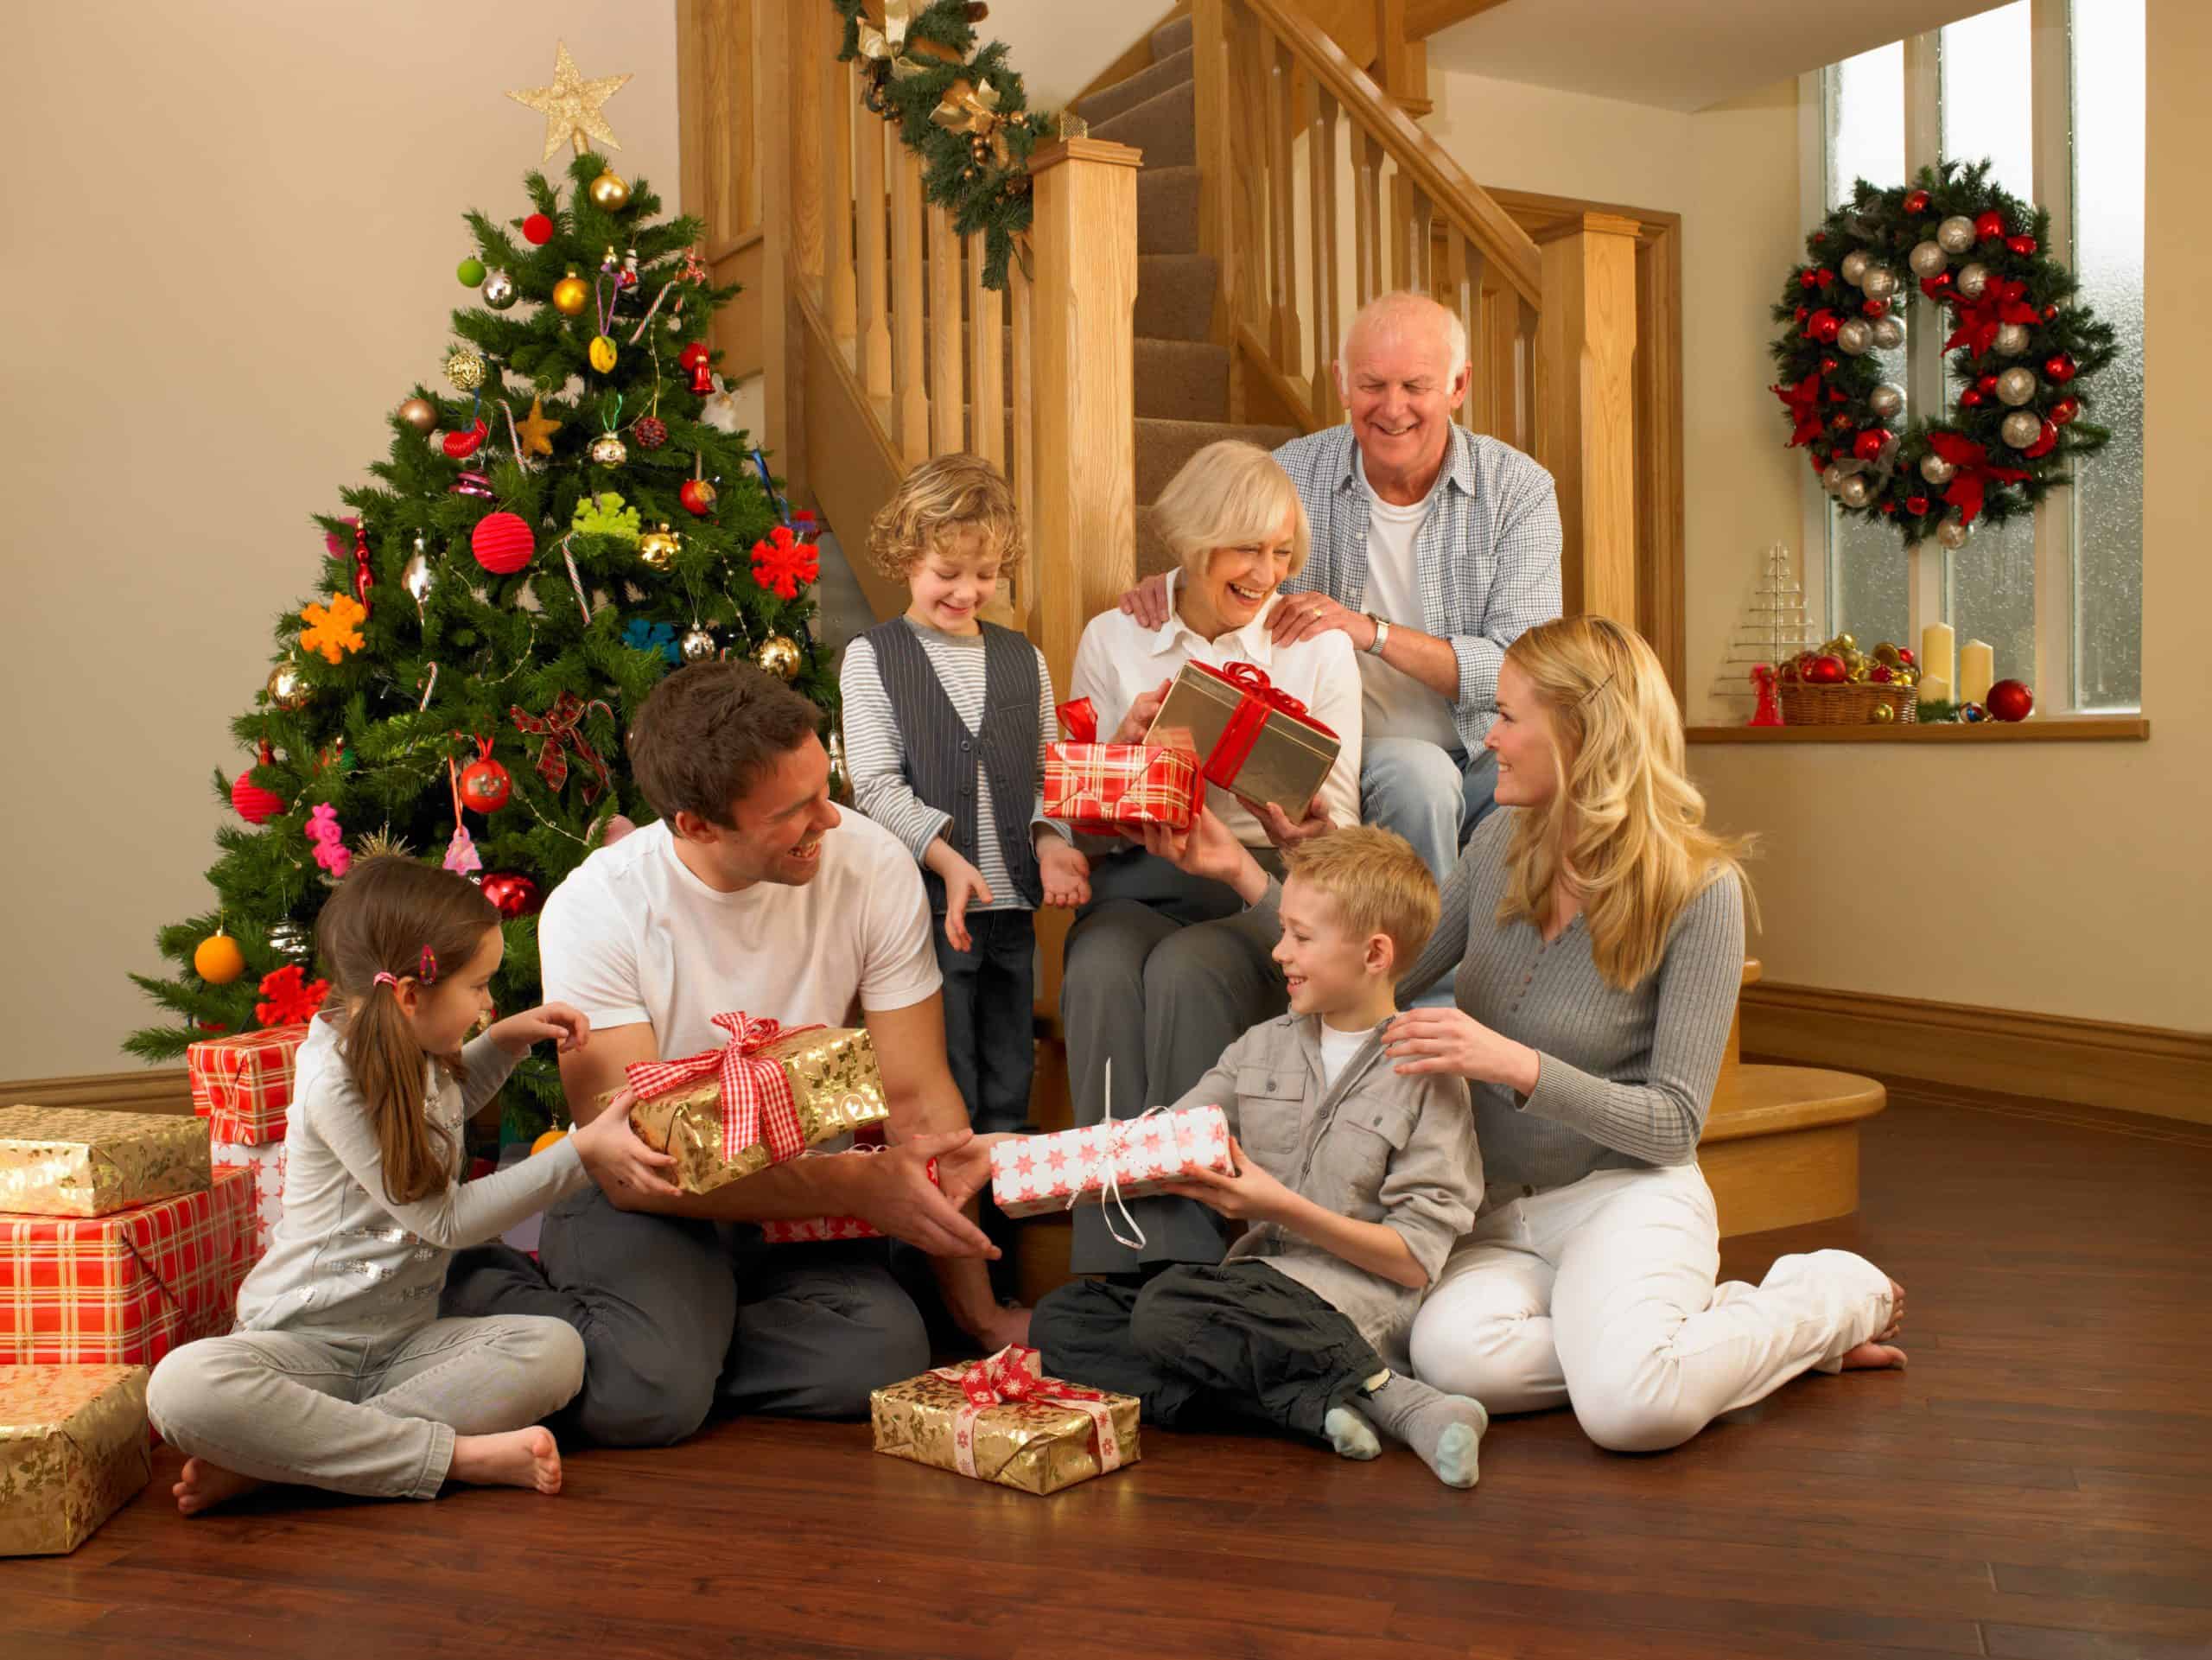 Family at Christmas on staircase   shutterstock  81748240